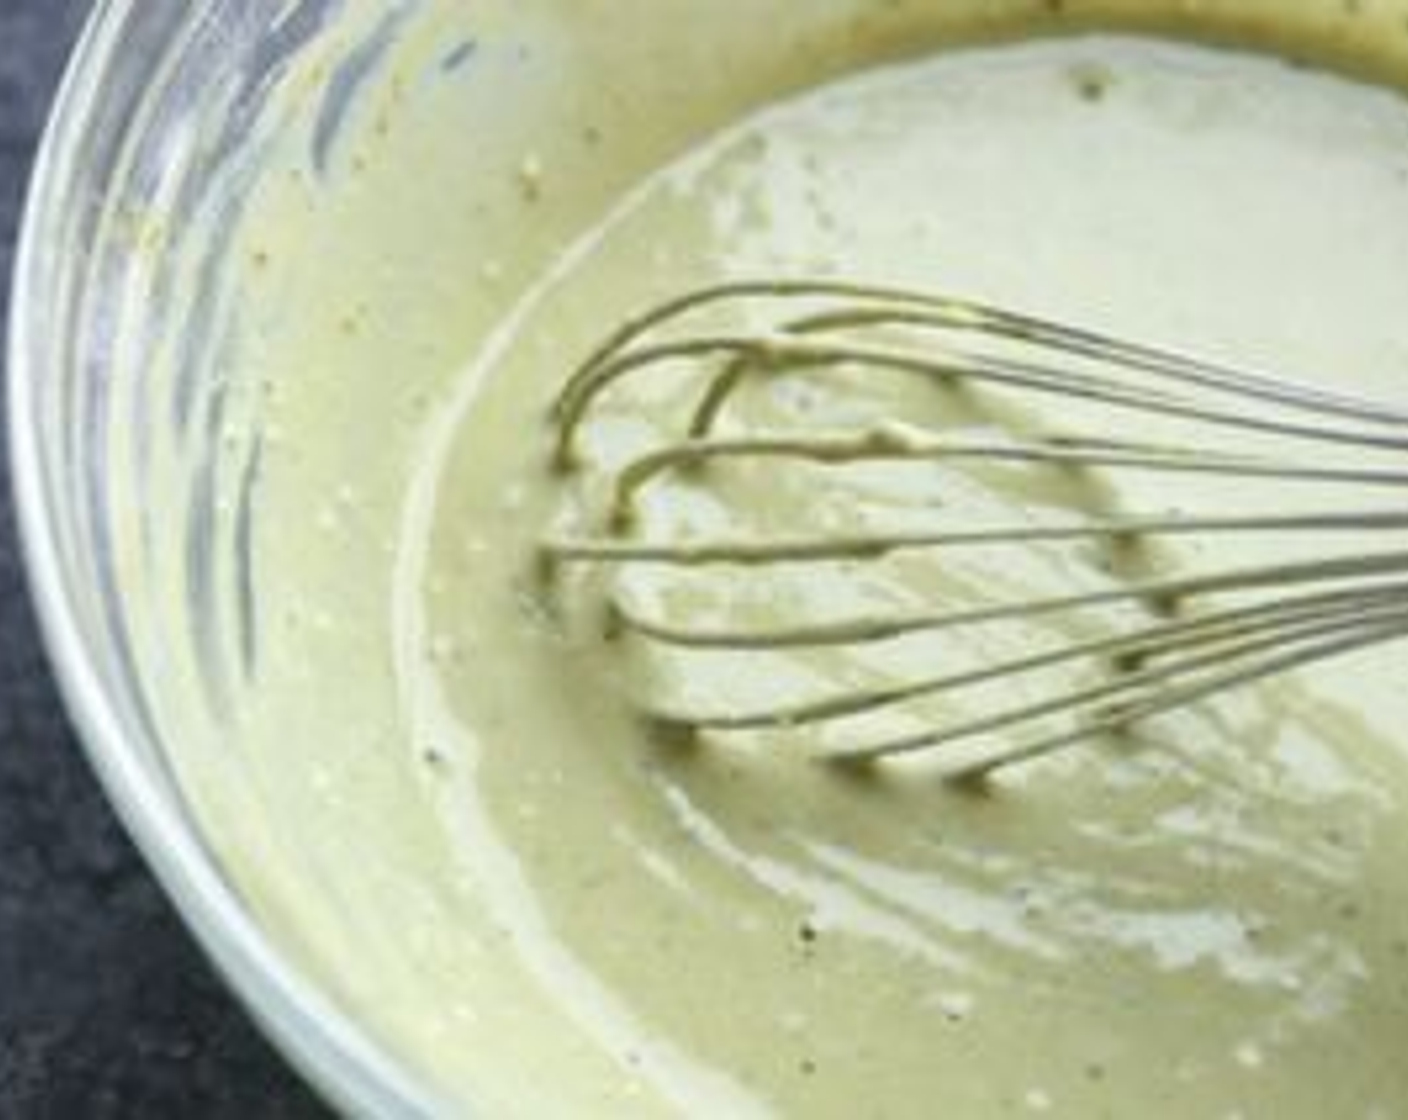 step 1 In a medium mixing bowl, whisk the Unsweetened Almond Milk (1/2 cup), Egg (1), Pure Vanilla Extract (1 tsp), and Coconut Oil (1 Tbsp) until combined. Add the Gluten-Free Pancake Mix (3/4 cup) and Matcha Powder (1/2 Tbsp). Whisk until smooth, adding a splash or two more almond milk if the batter is too thick.